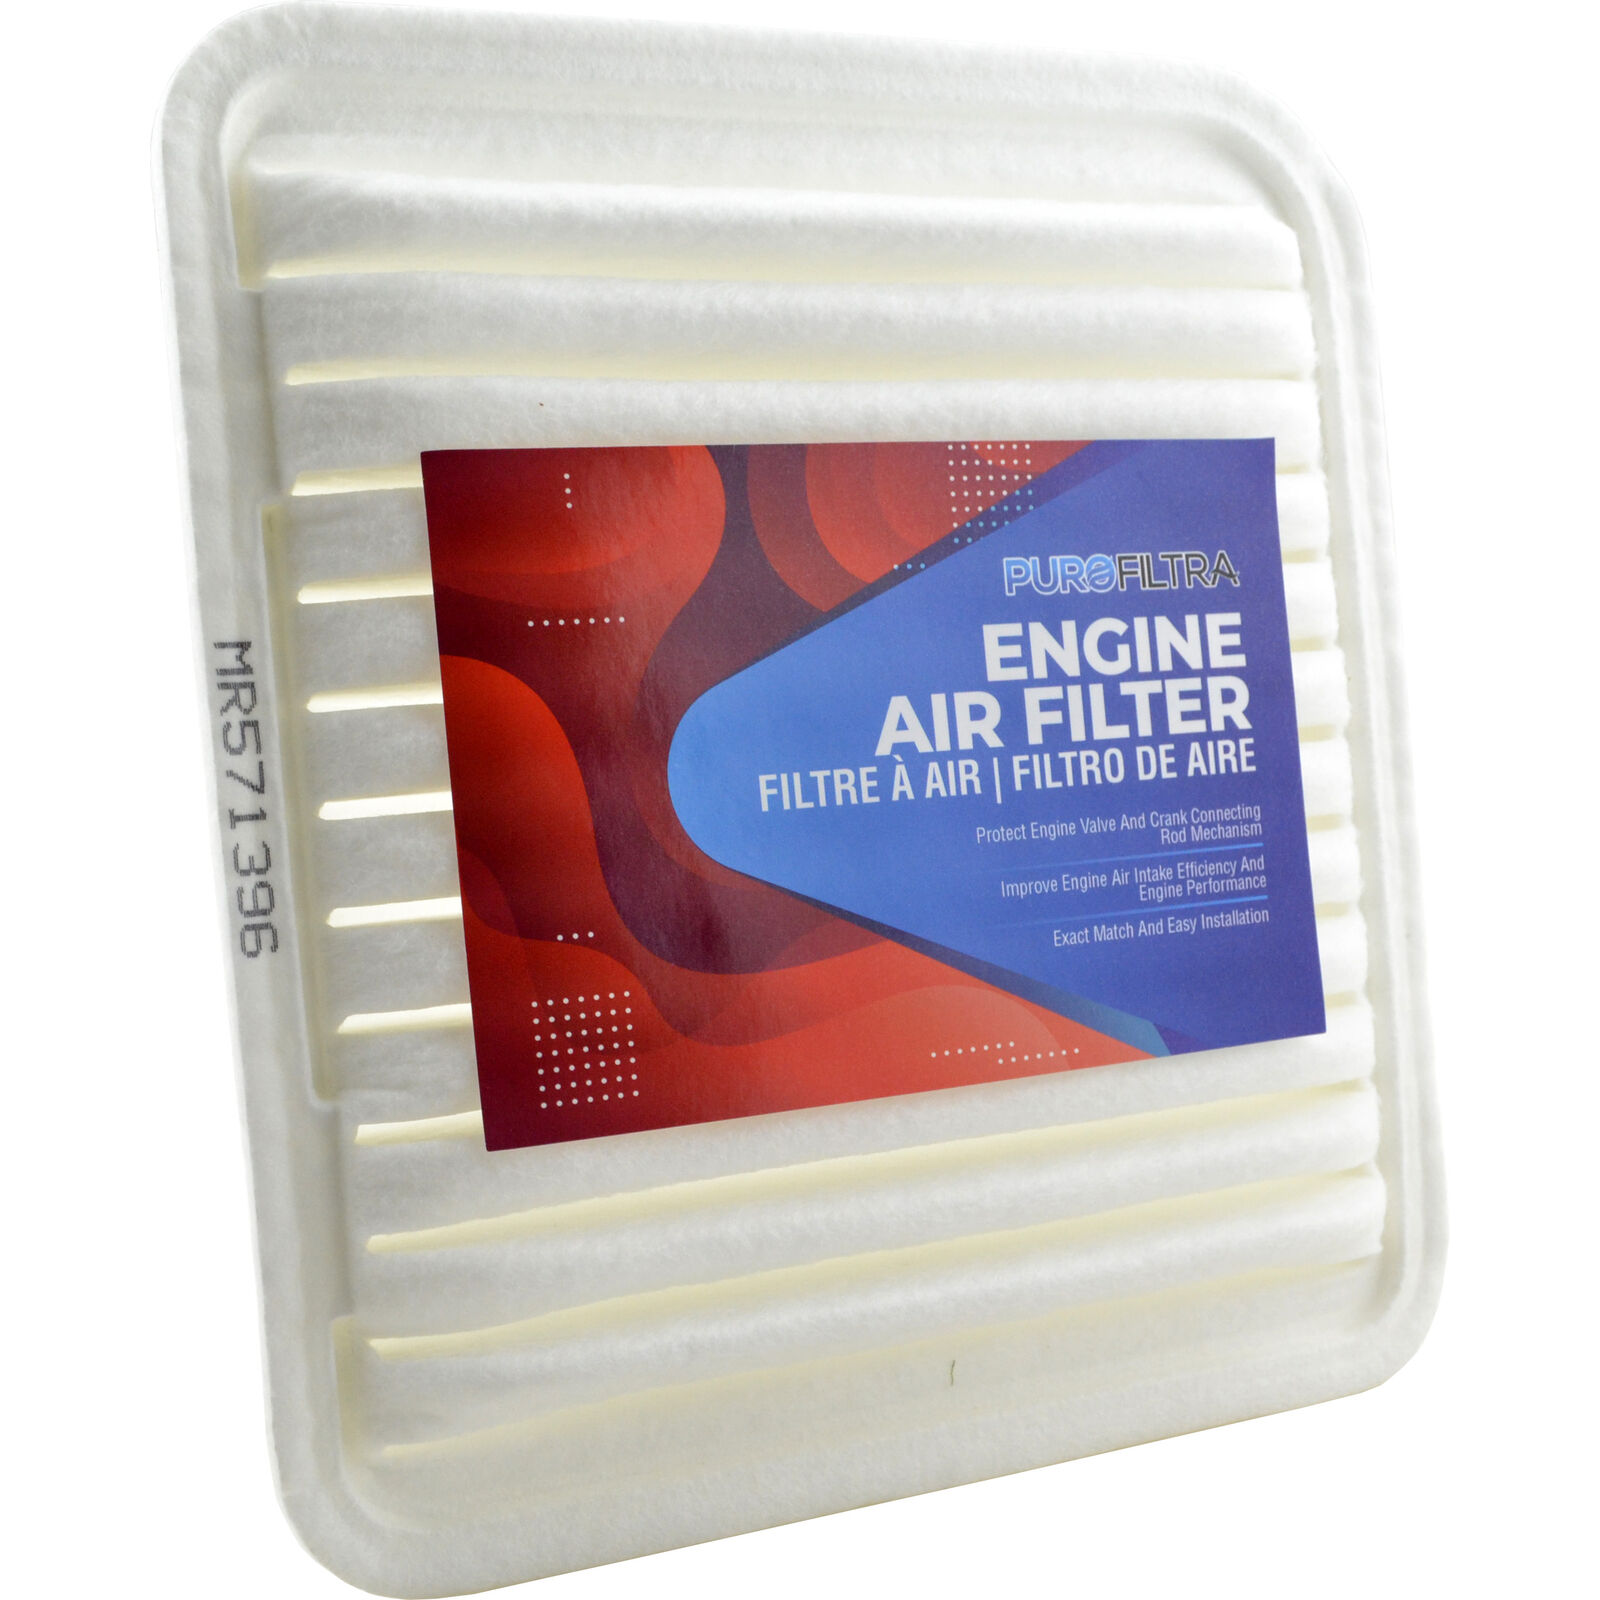 Engine Air Filter for 04-12 Mitsubishi Galant 04-11 Endeavor  06-12 Eclipse